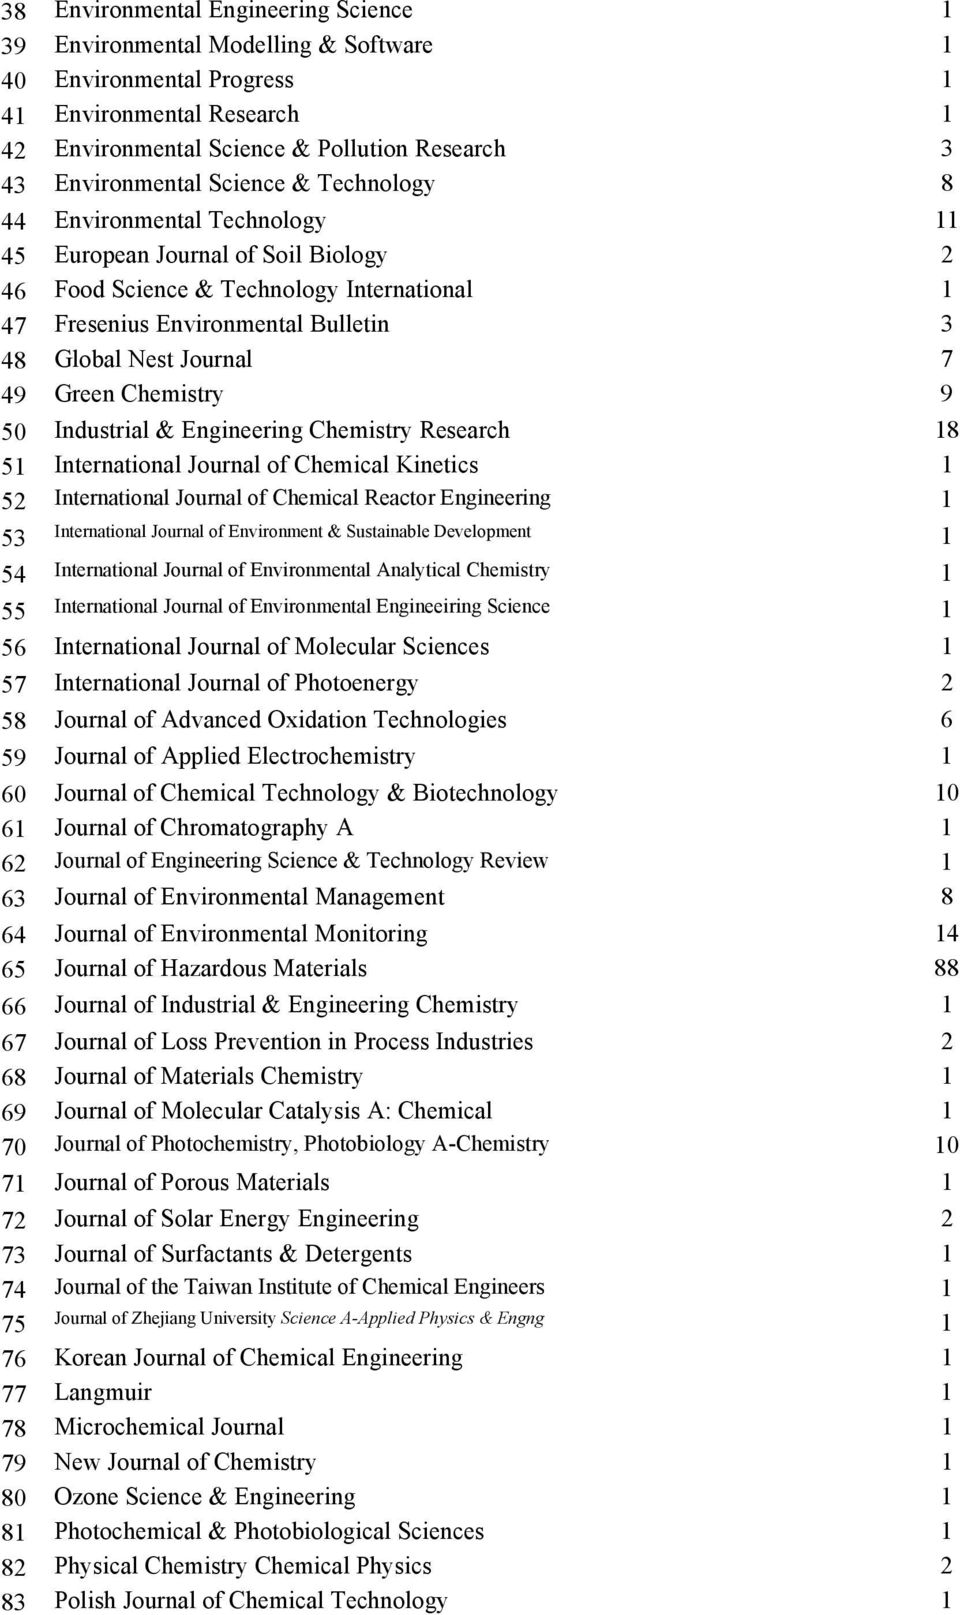 49 Green Chemistry 9 50 Industrial & Engineering Chemistry Research 18 51 International Journal of Chemical Kinetics 1 52 International Journal of Chemical Reactor Engineering 1 53 International